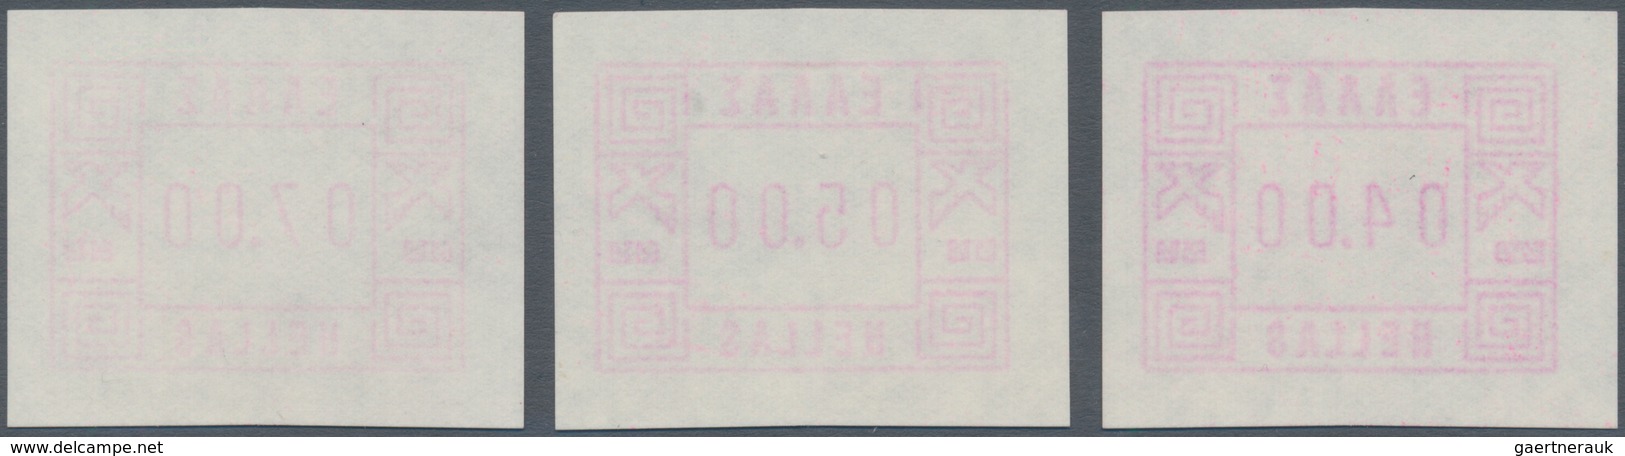 Griechenland: 1979, (ATM Piloting Issue). One Of The Very First ATM Issues In The World That Has Bee - Brieven En Documenten